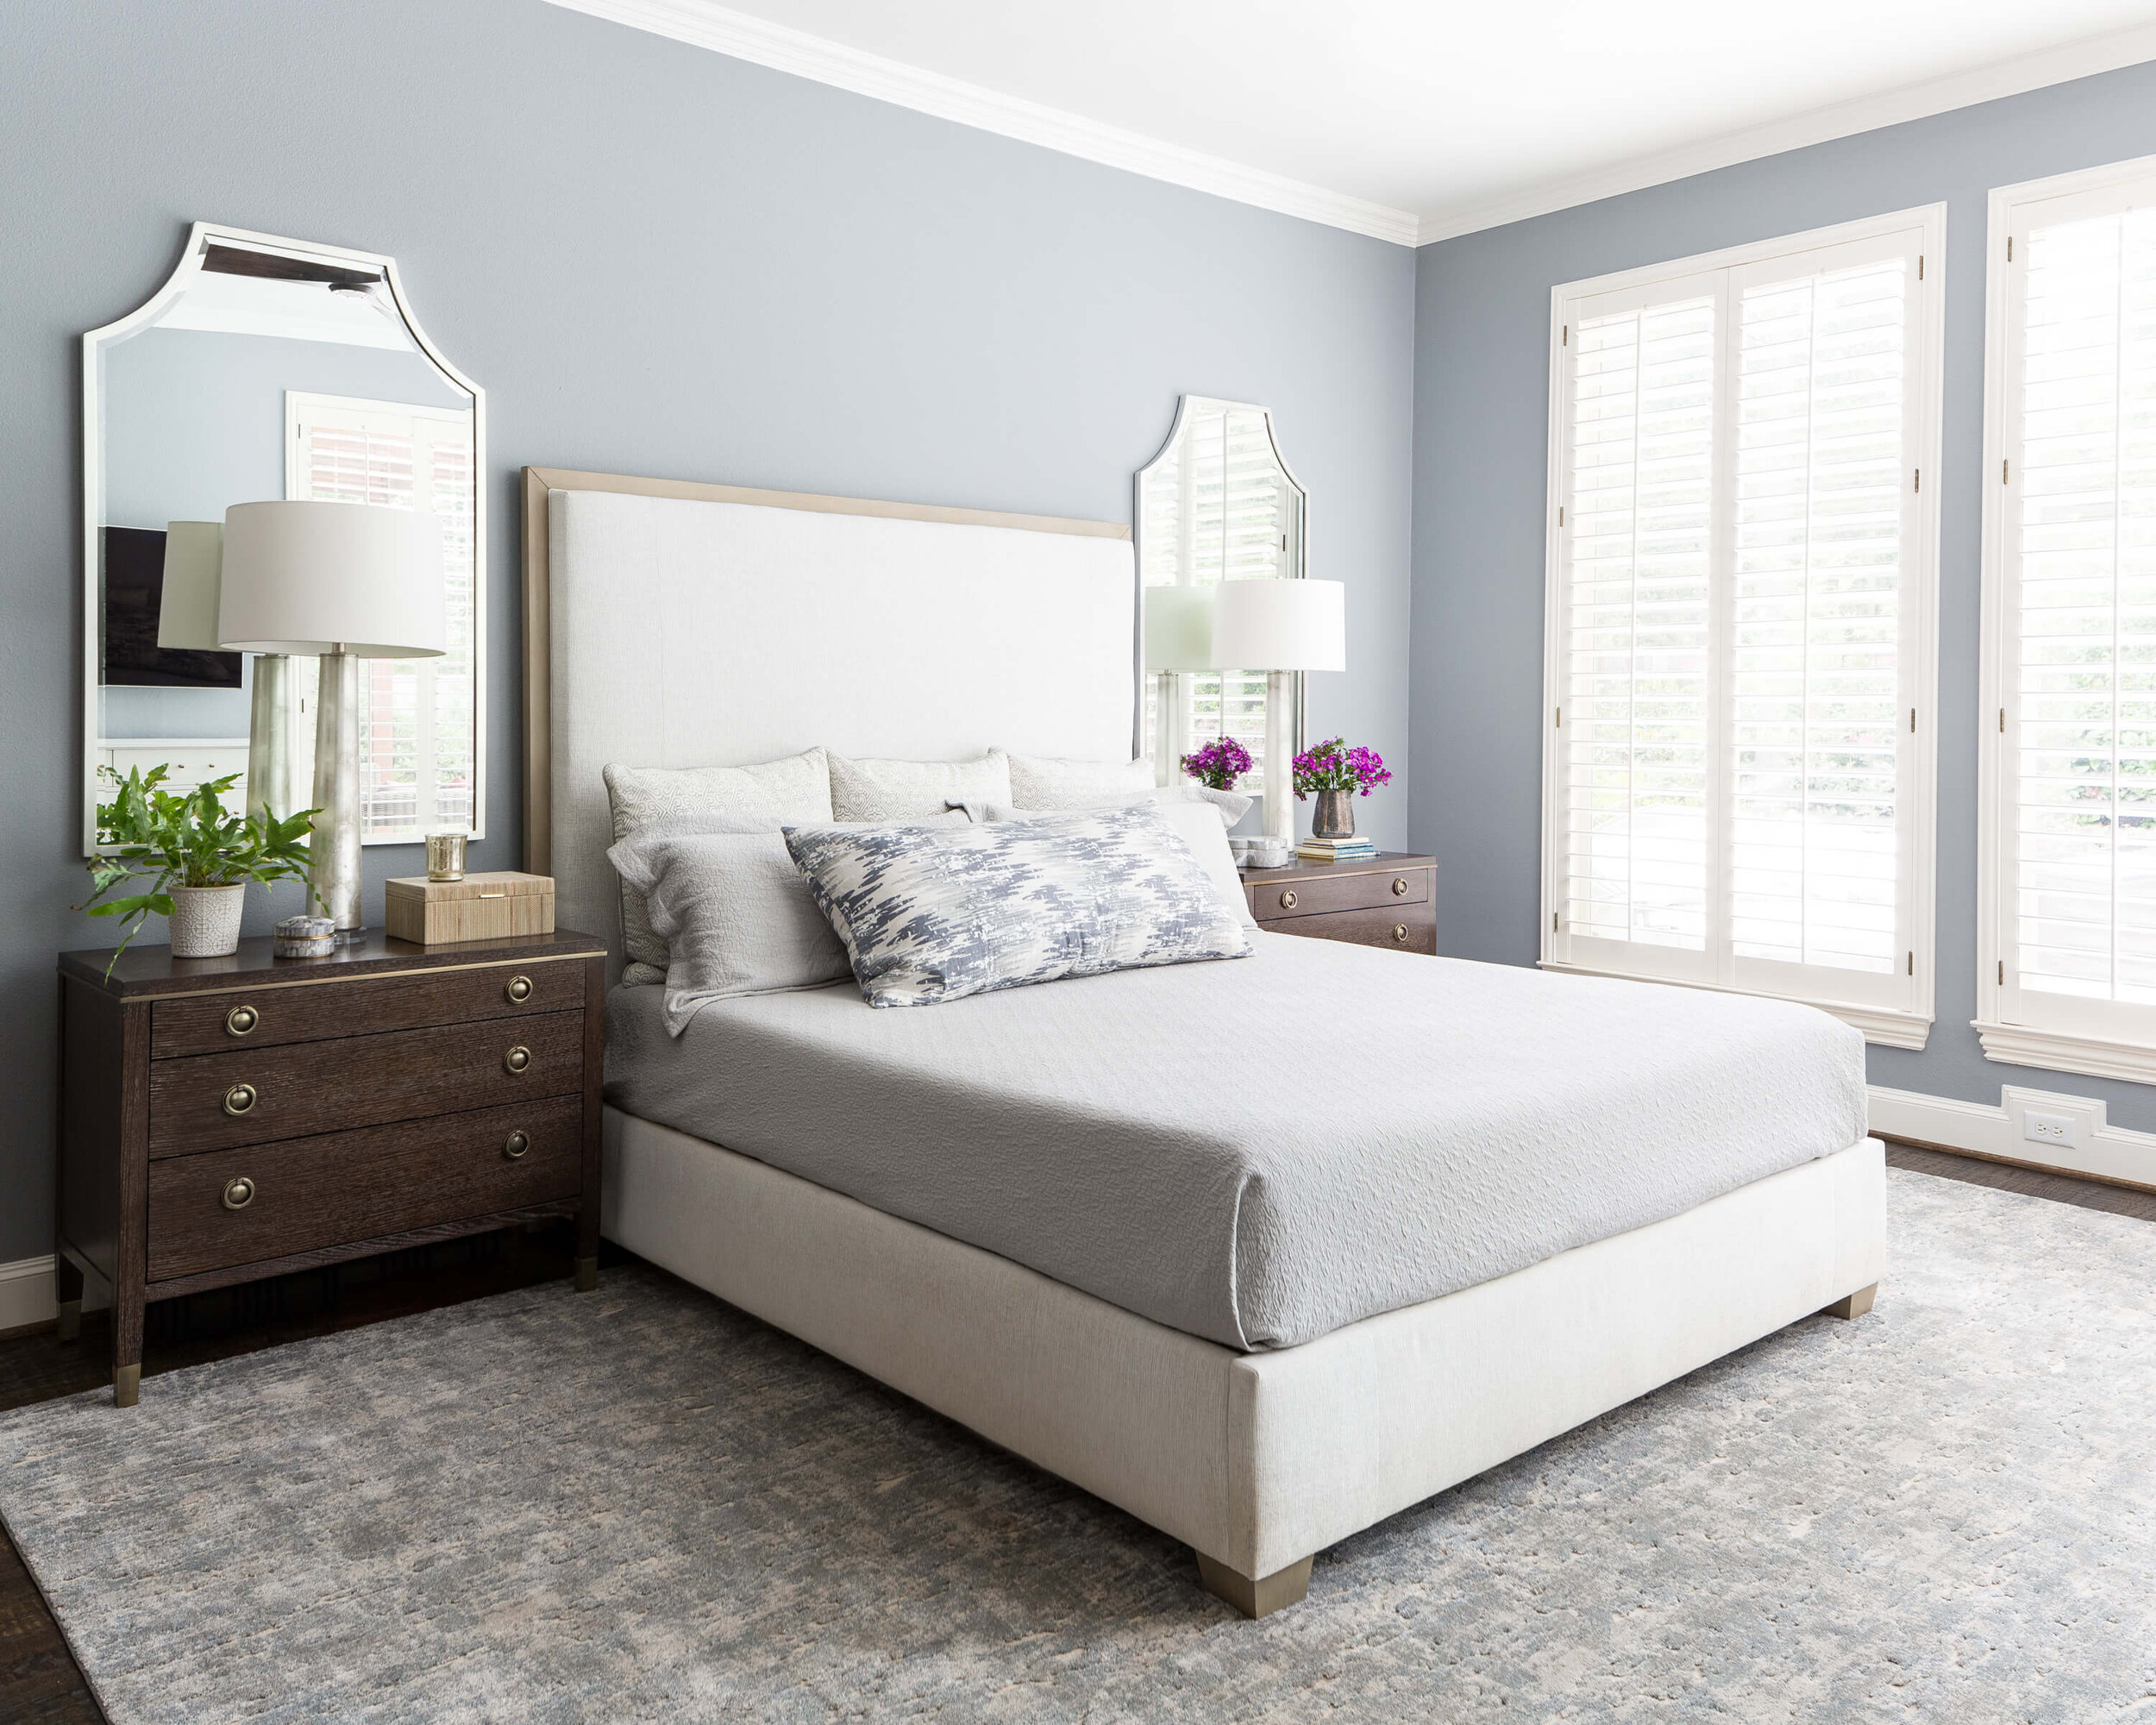 Favorite Blue Green Gray Paint Colors Perfect For A Tranquil Bedroom — DESIGNED